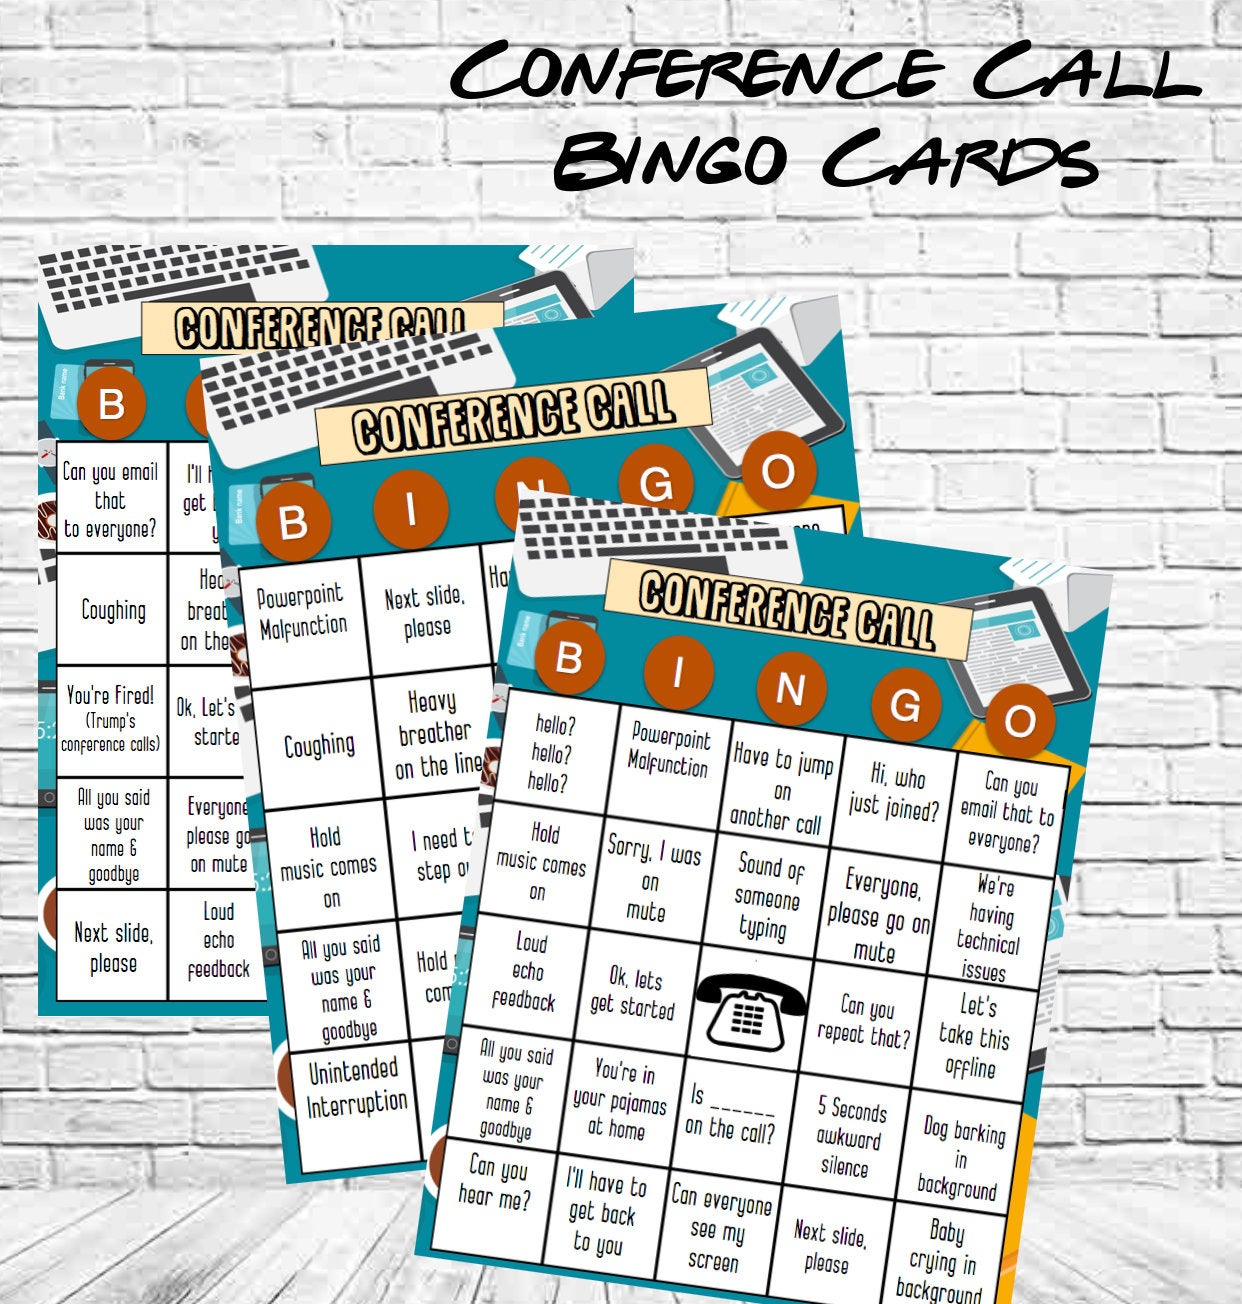 Company Conference Call Bingo Cards | Retirement Party Bingo Game |  Conference Call Bingo Game | Instant Download For An Office Party!